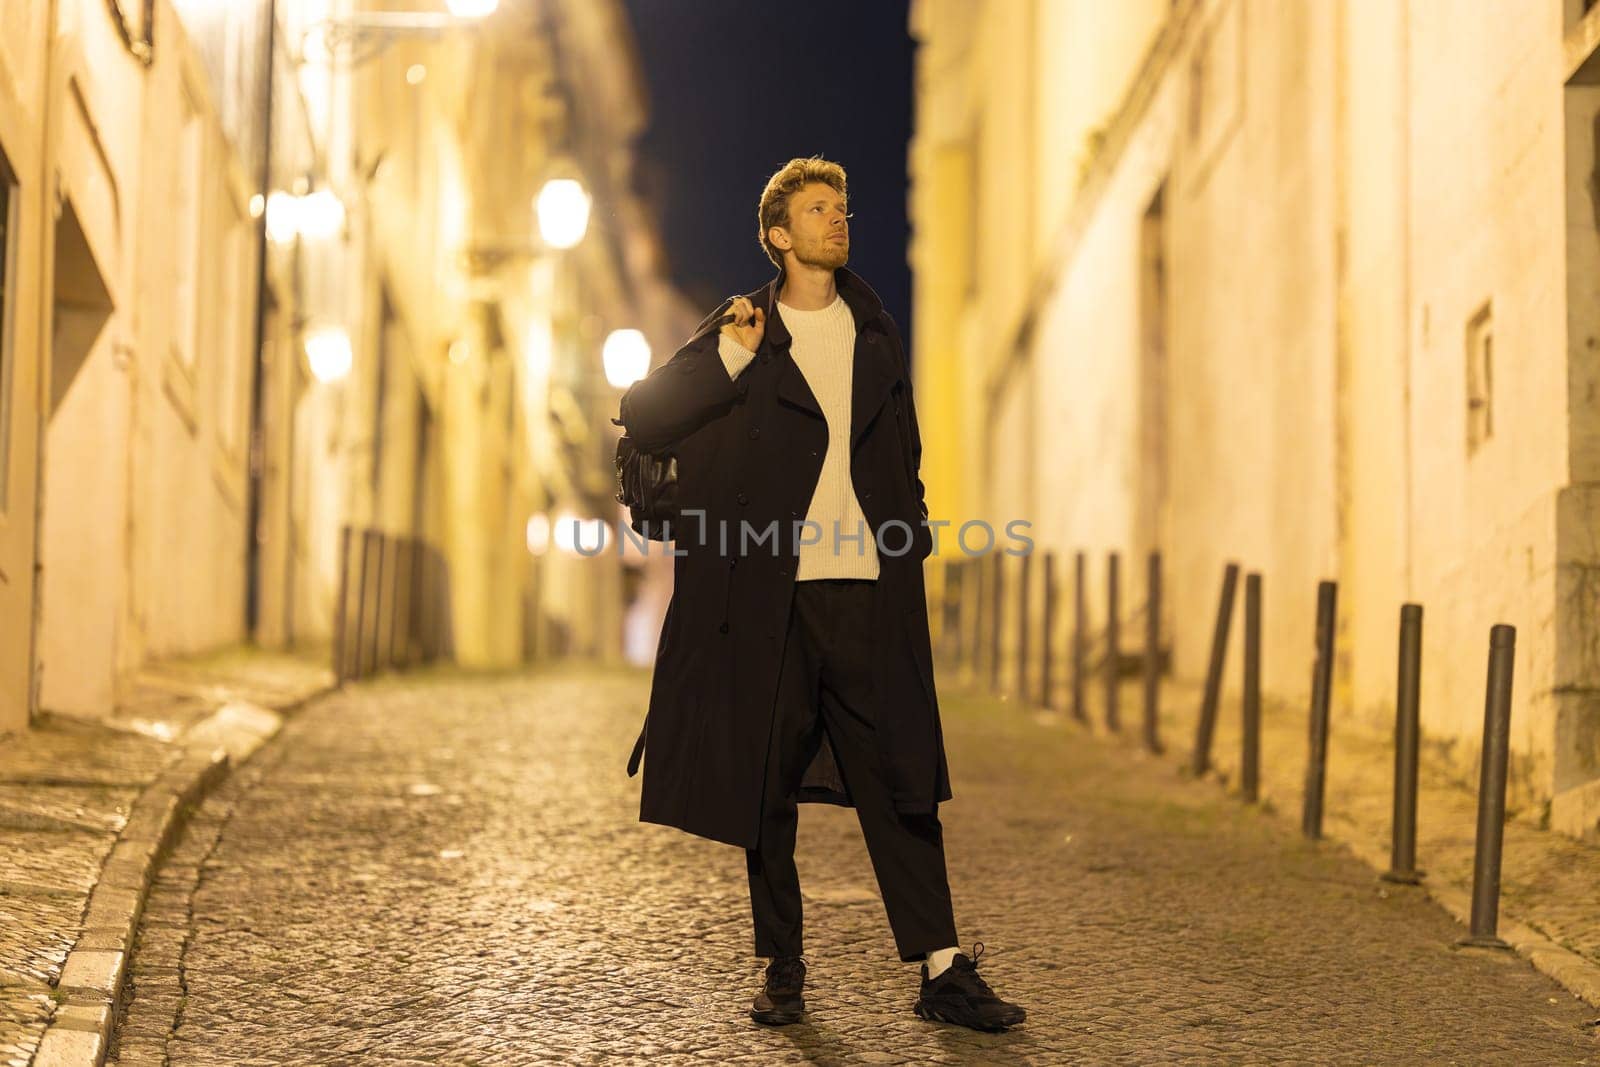 A man wearing a black coat and white shirt stands on a cobblestone street. He is holding a backpack and he is lost in thought. The street is dimly lit, giving the scene a somewhat somber